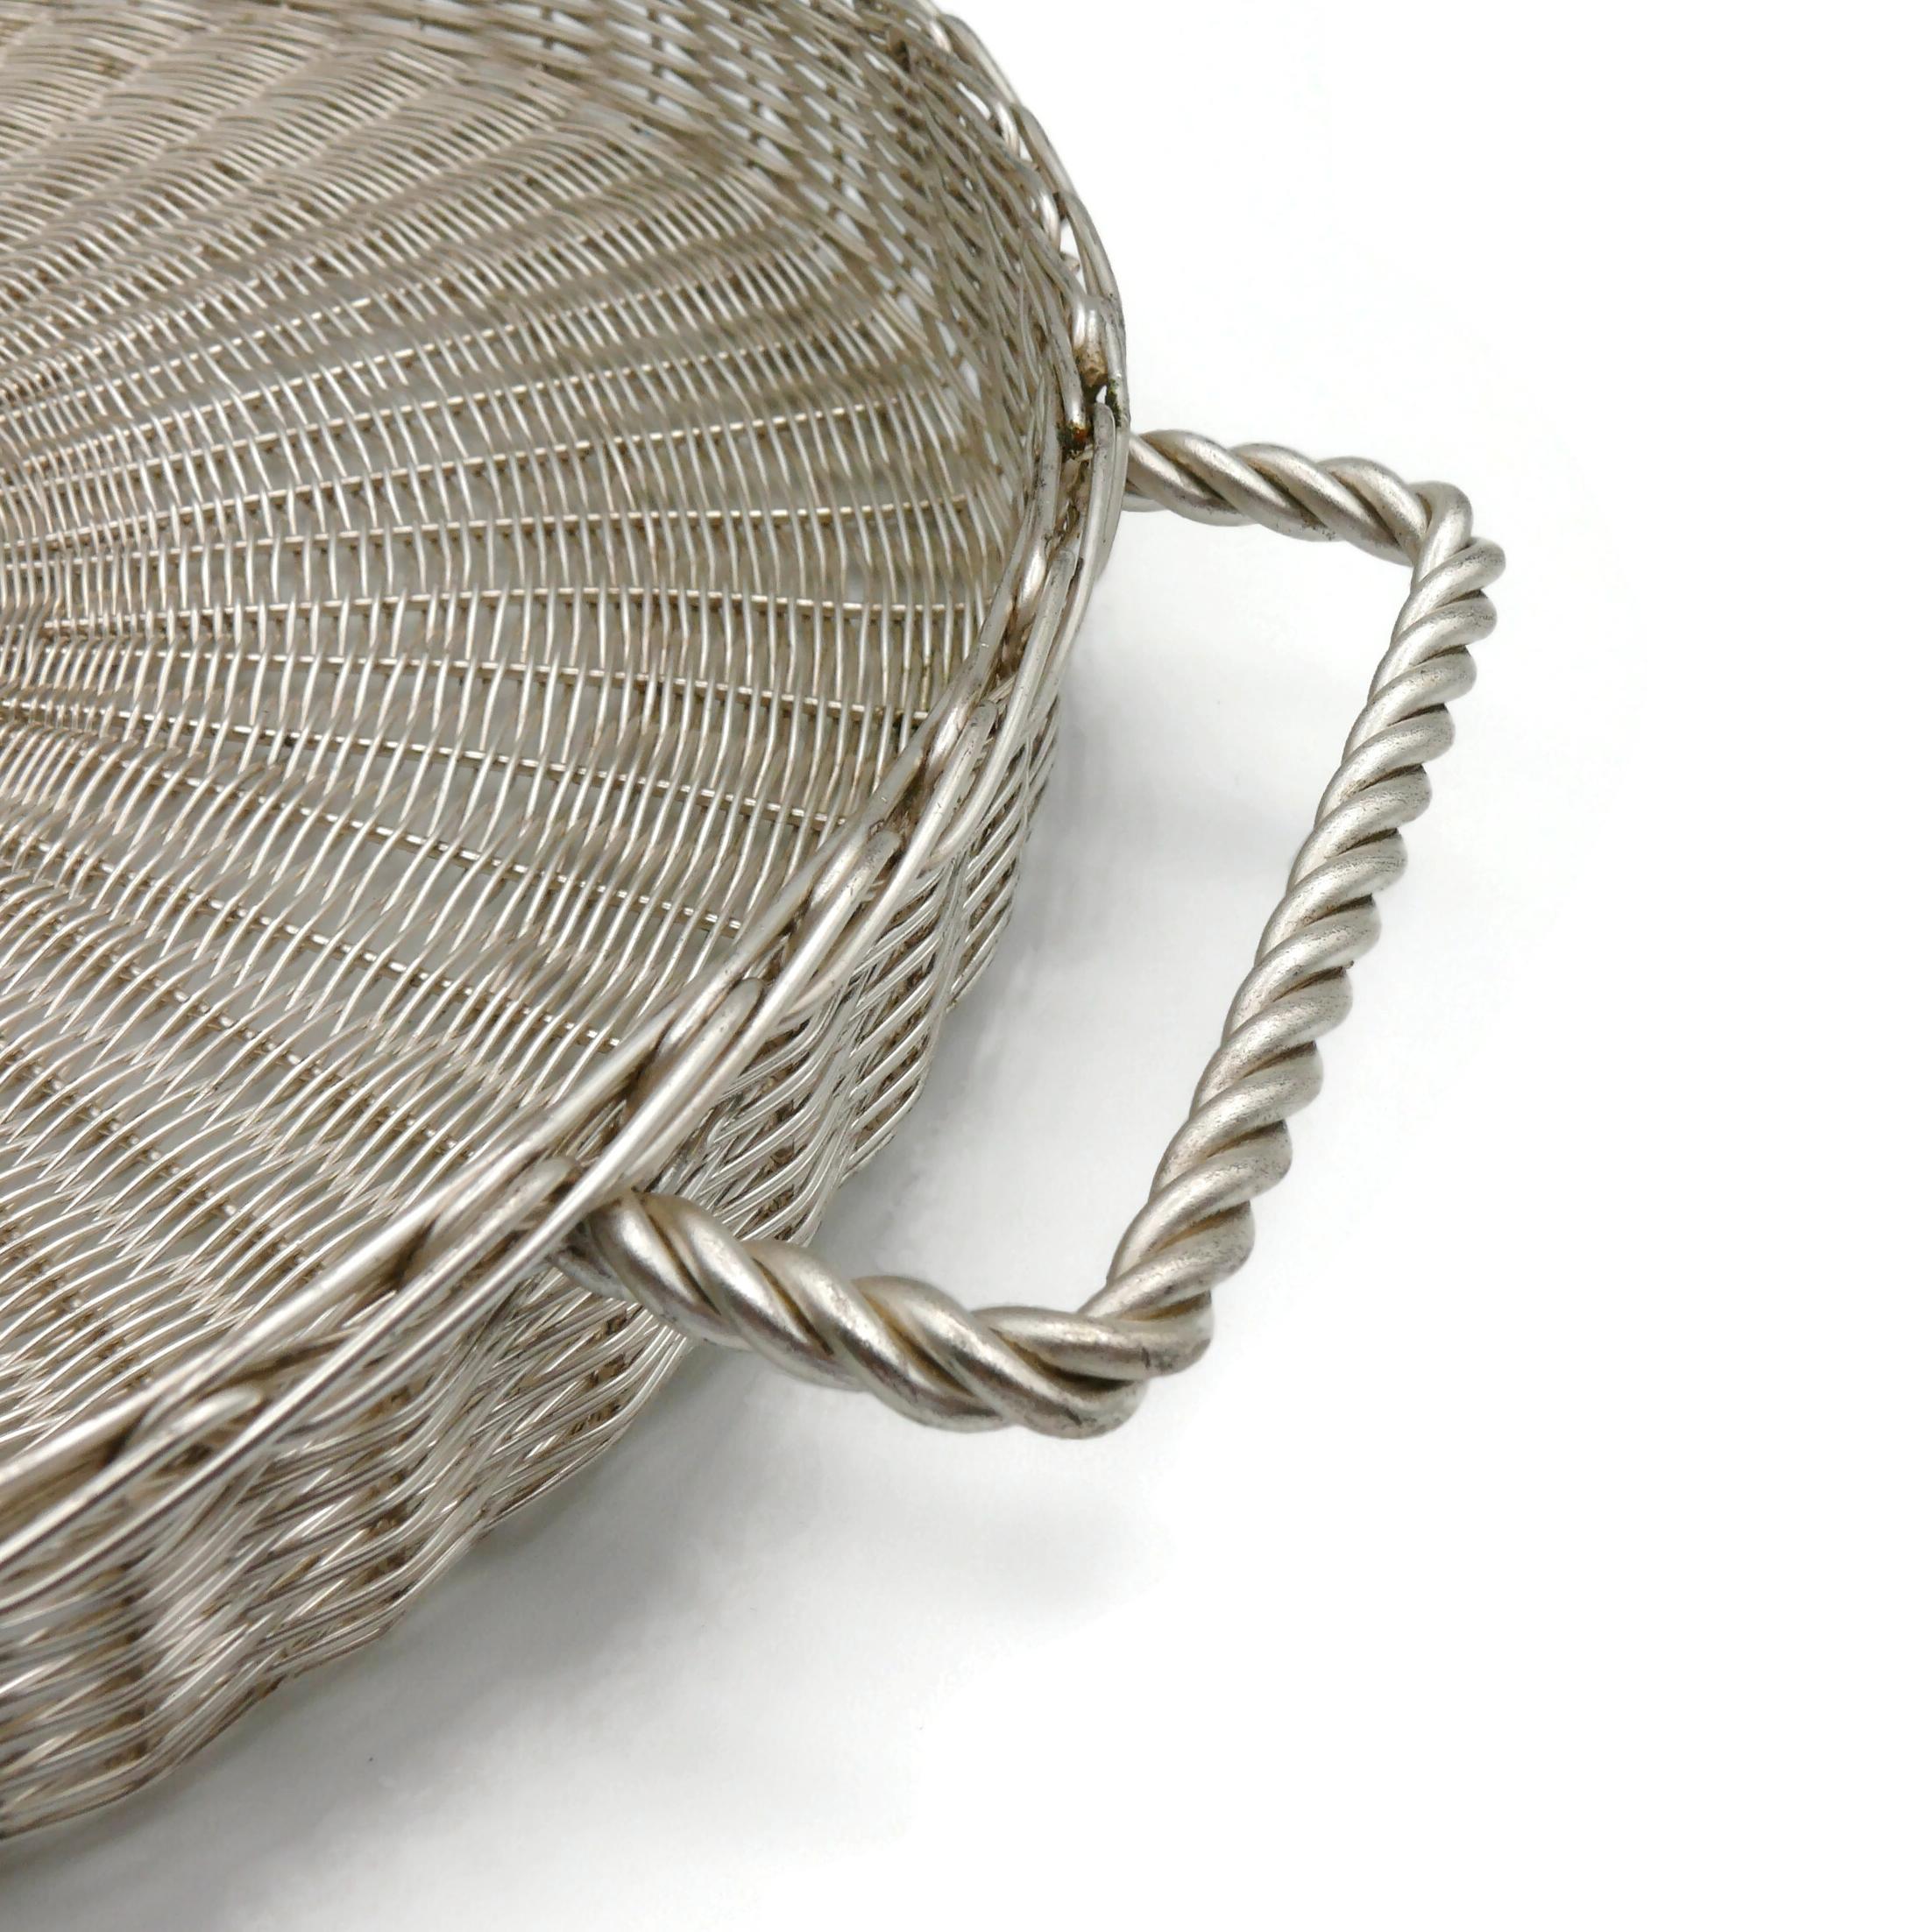 CHRISTIAN DIOR Home Collection Vintage Silver Plated Wicker Style Basket 3